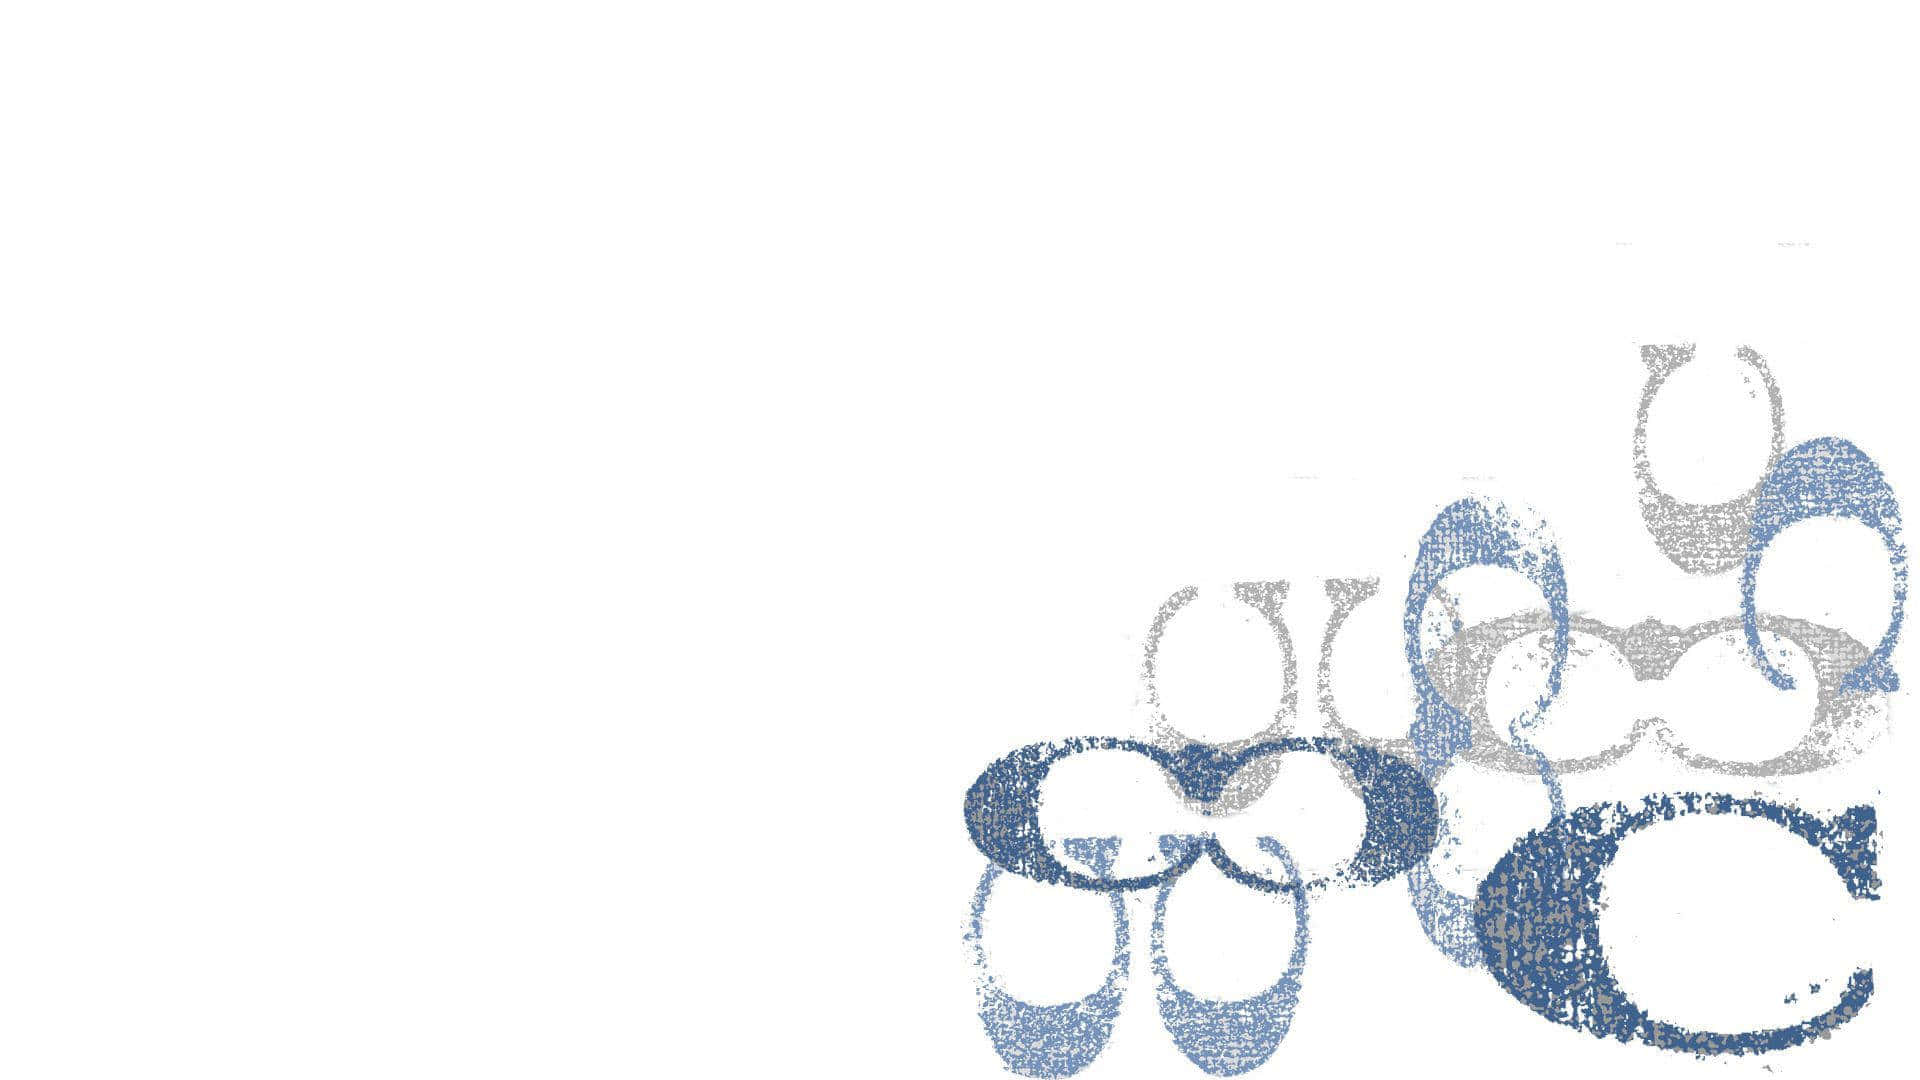 A Blue And White Image Of A Pair Of Shoes